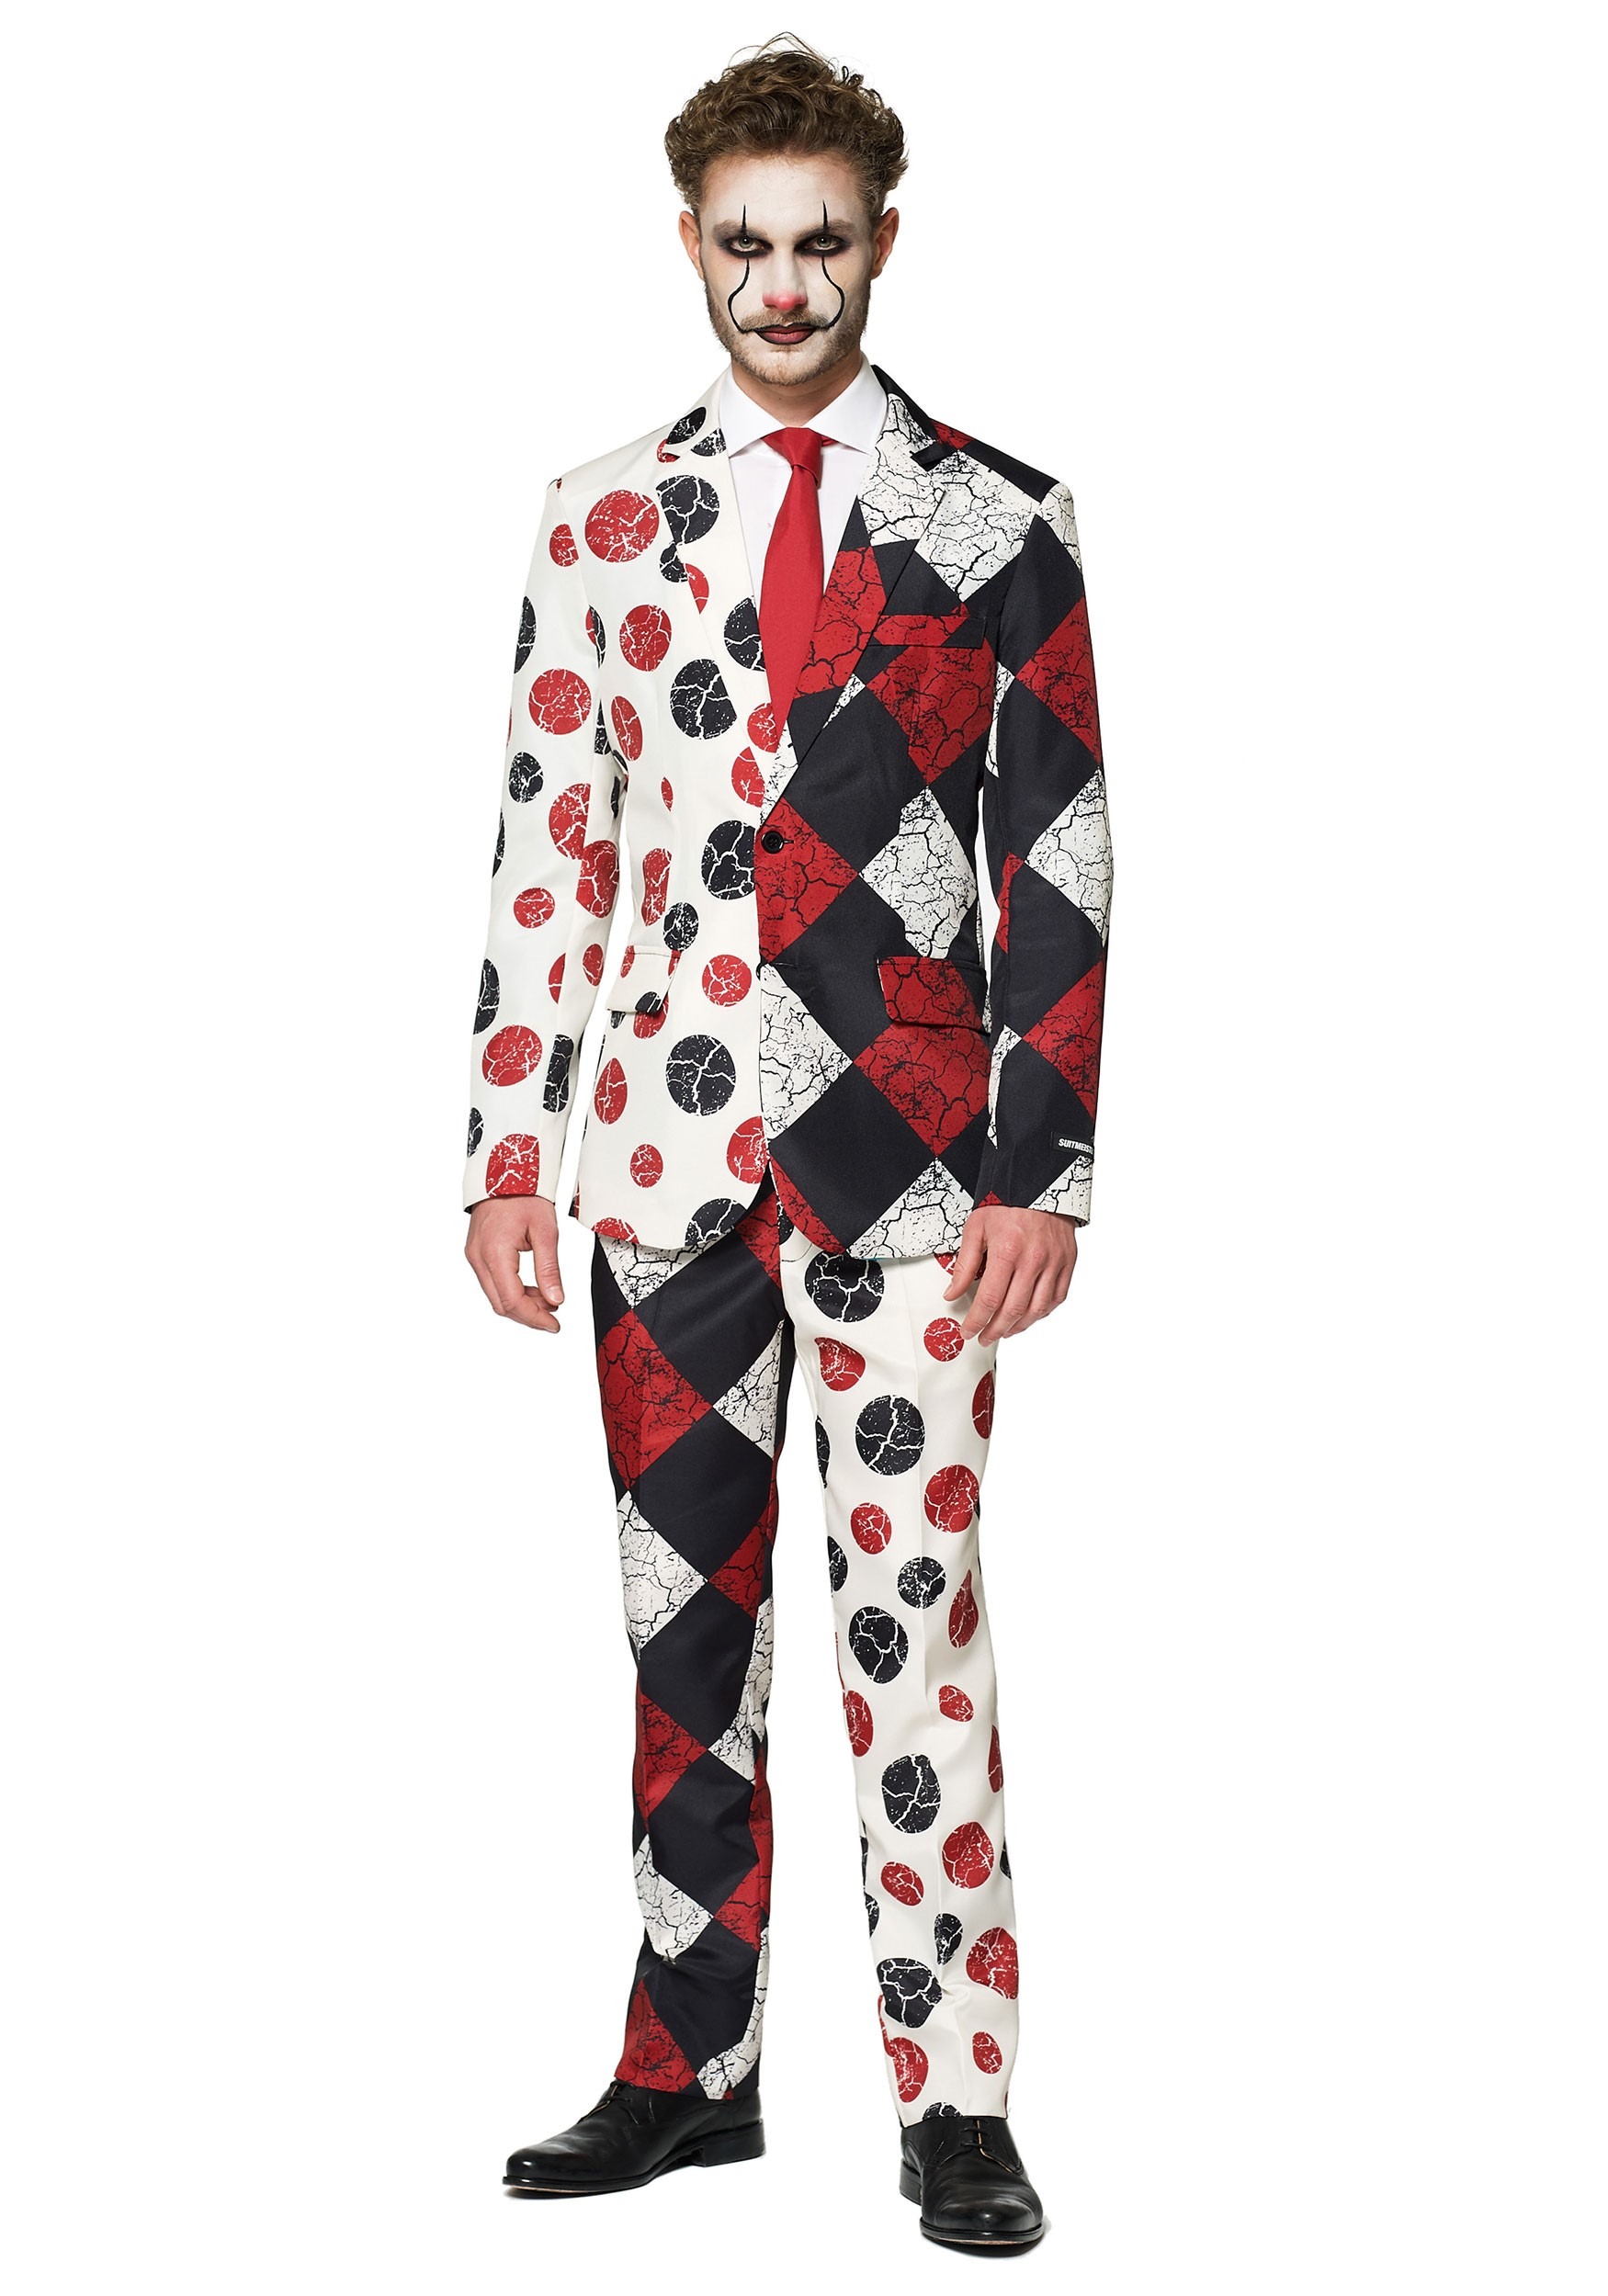 Image of Men's Clown Suitmeister Suit ID OSOBAS-0065-S